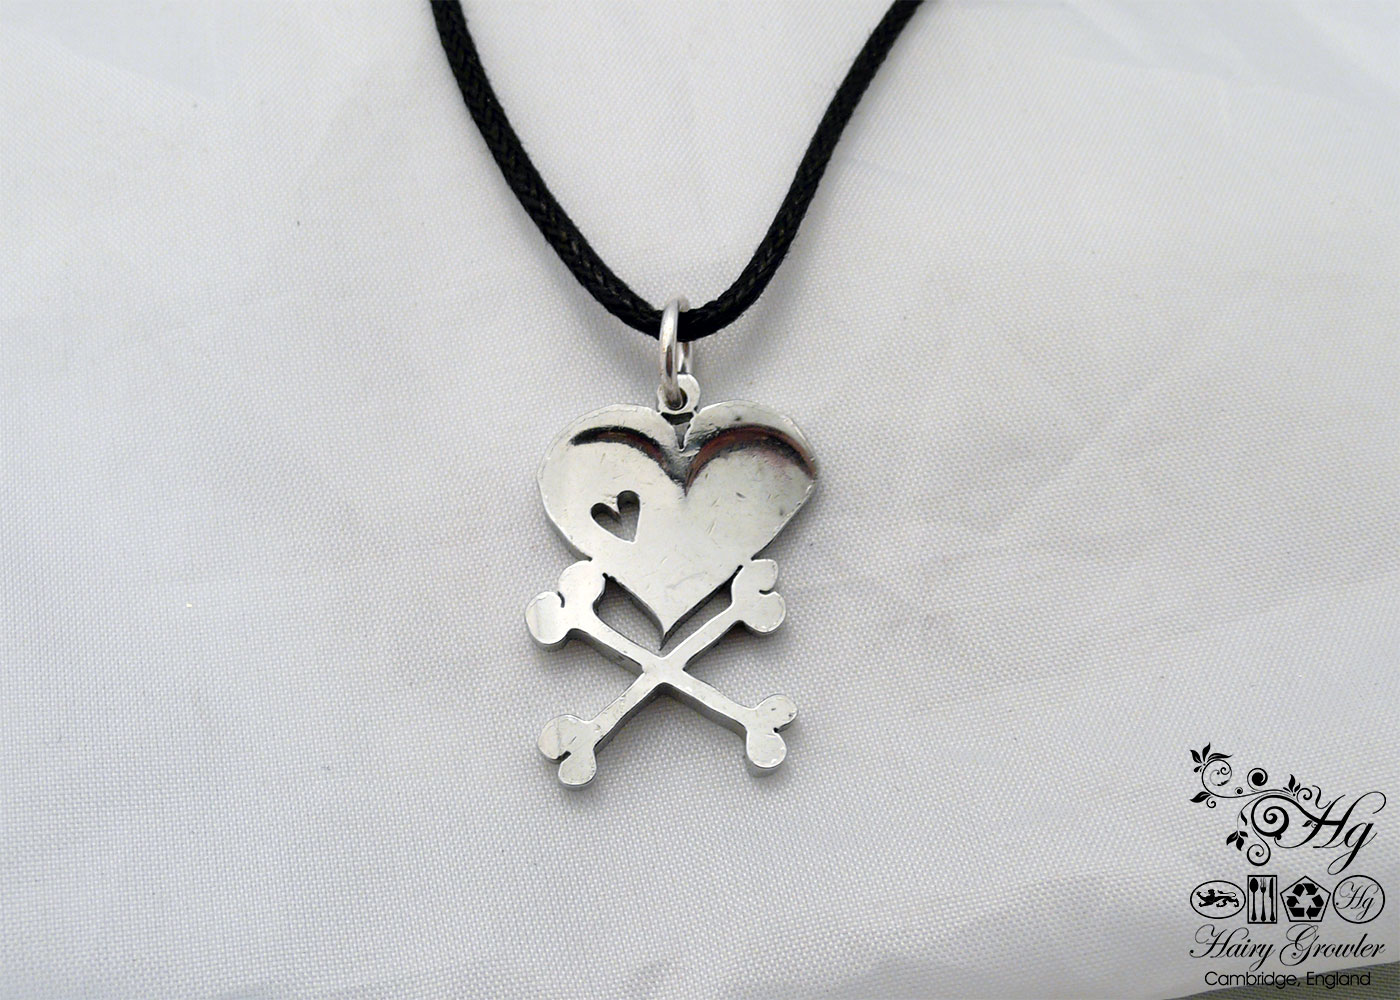 handcrafted and upcycled vintage spoon skull and crossbones necklace pendant